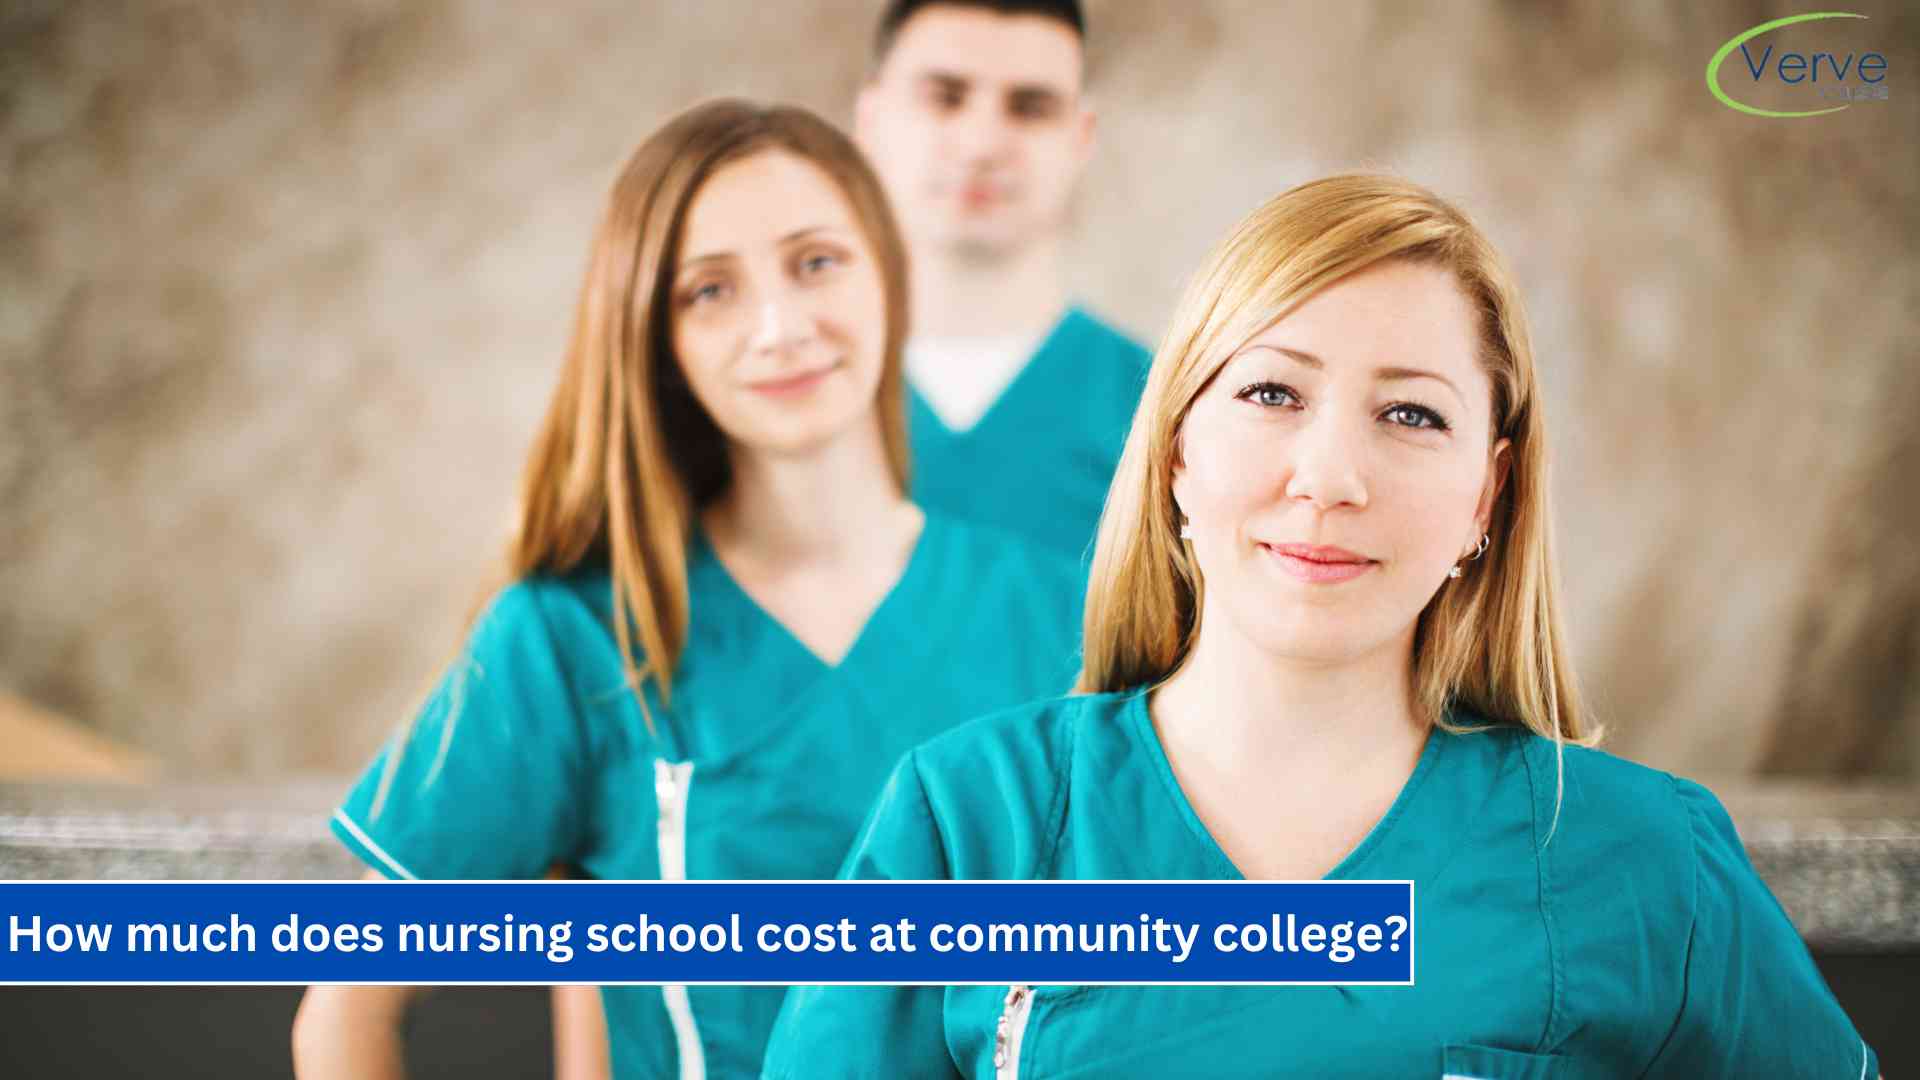 Scholarships and Financial Aid for Community College Nursing Students